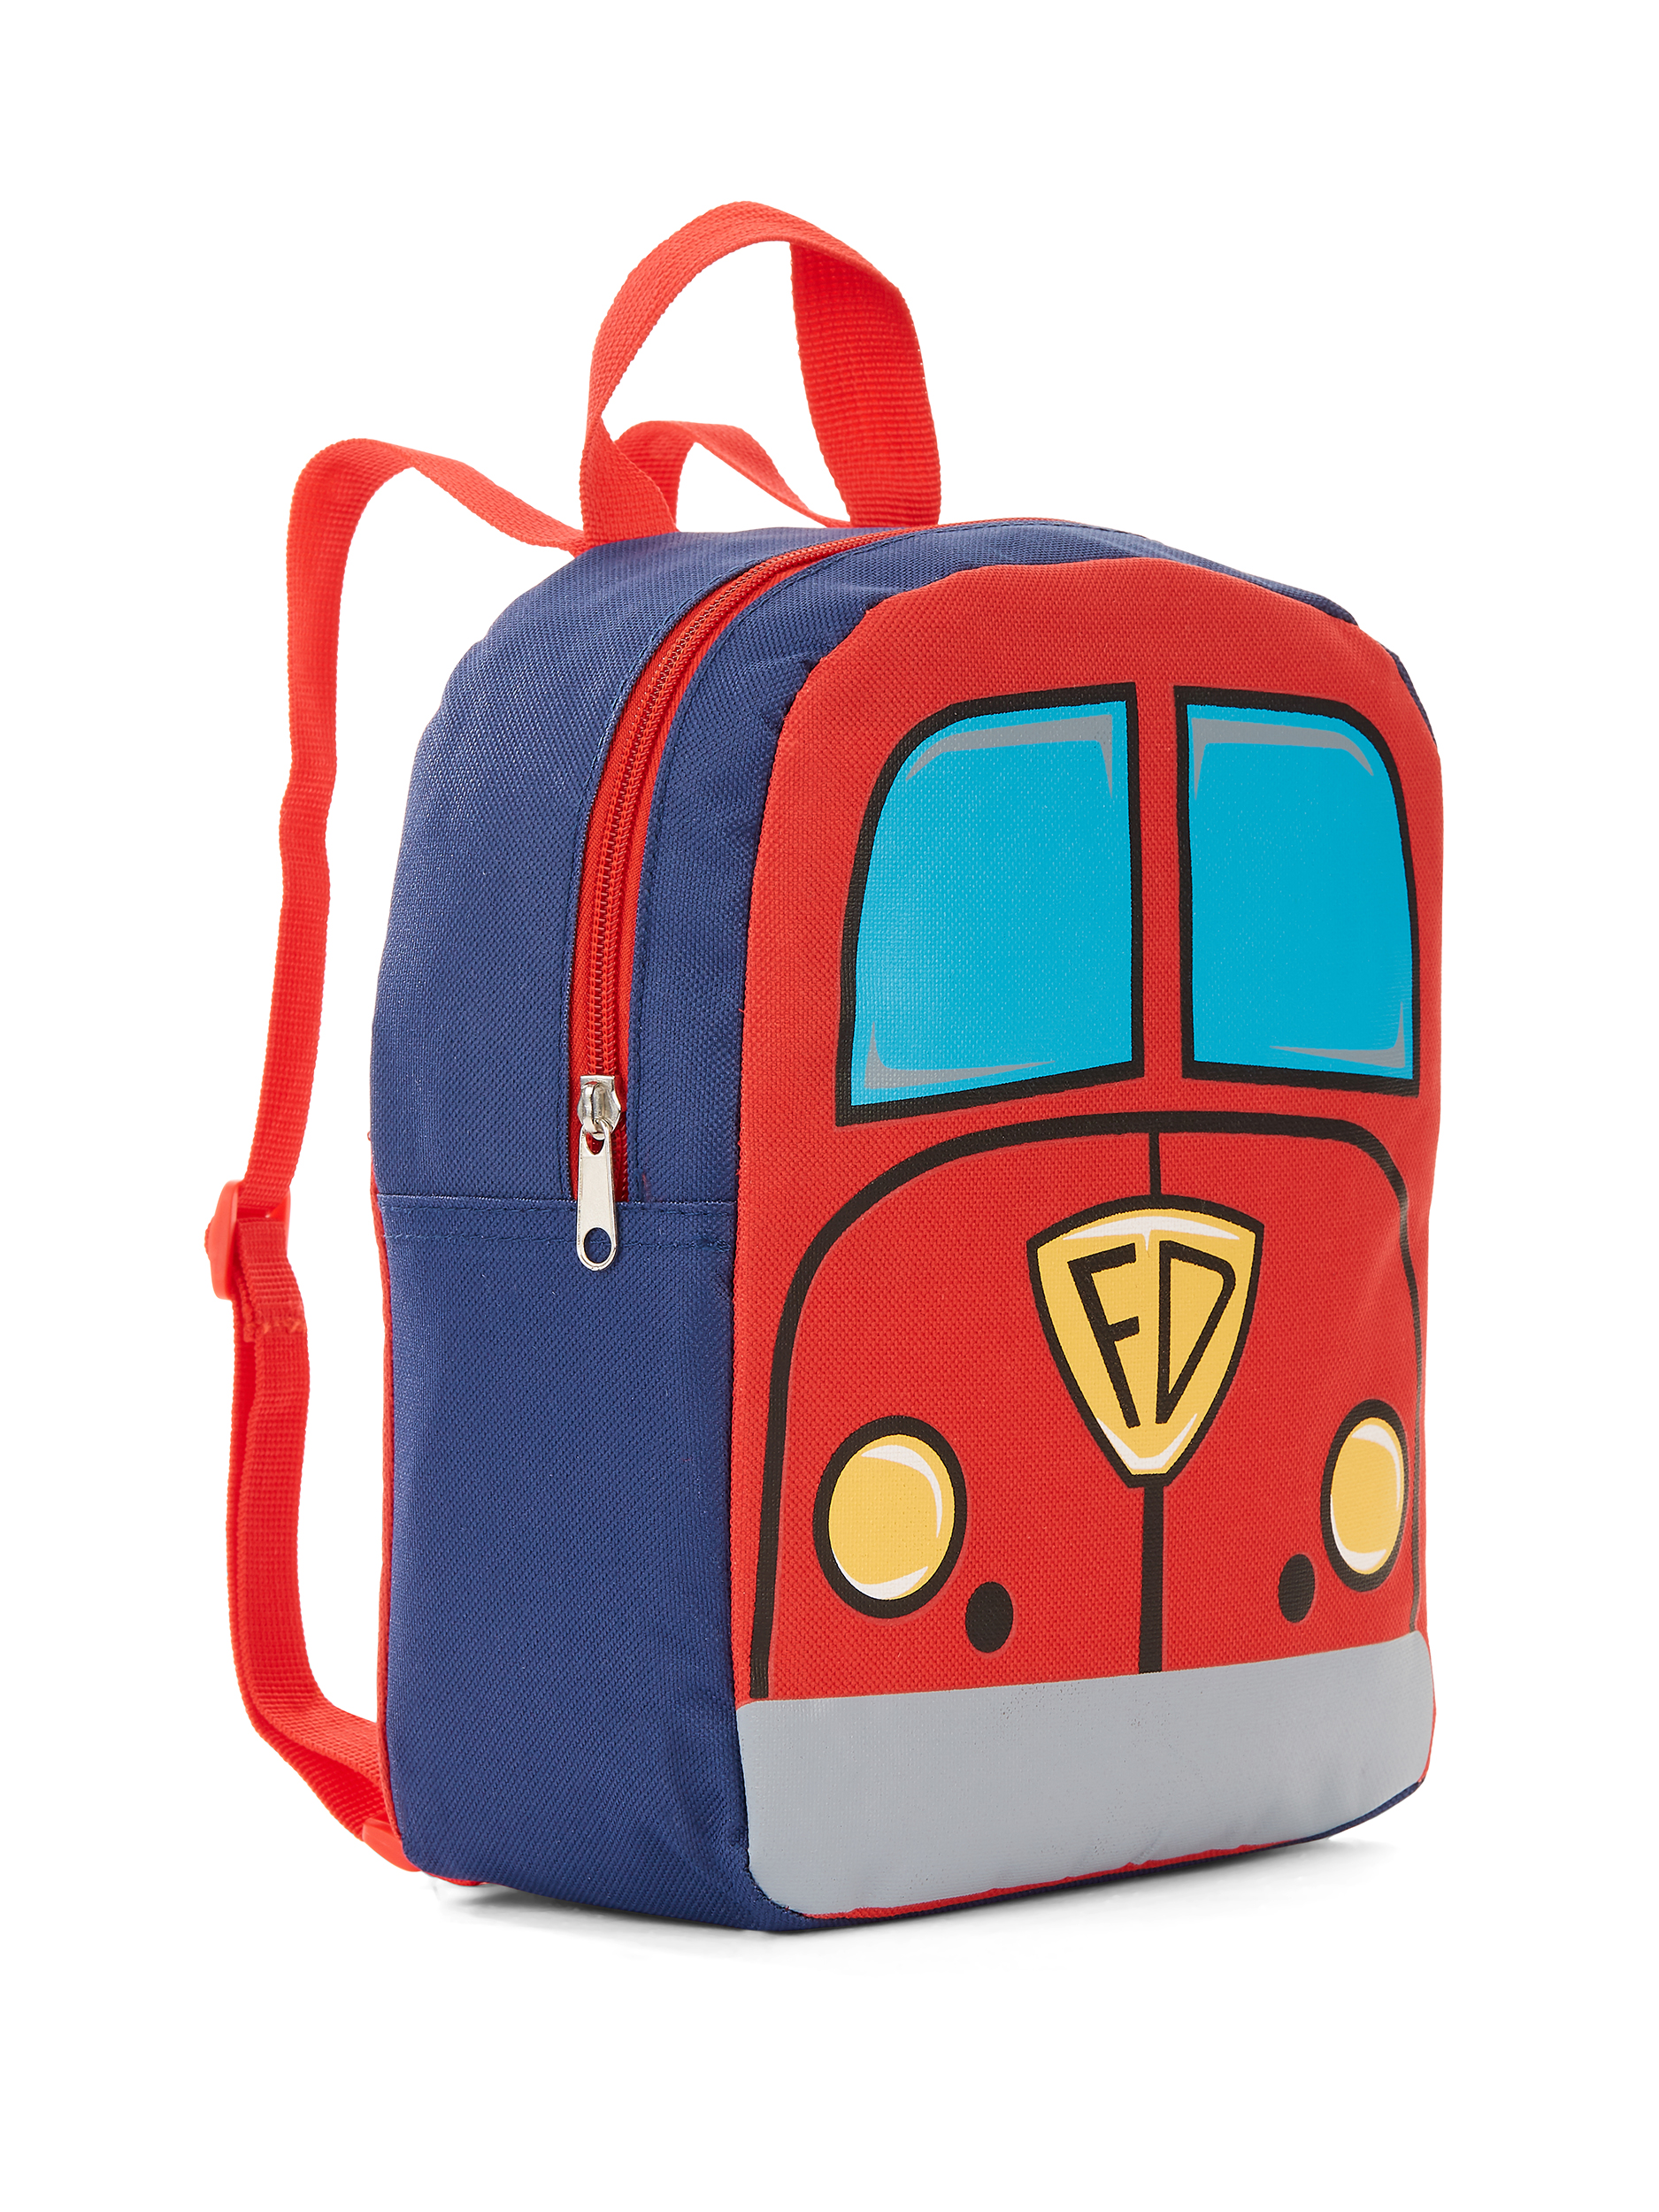 Carried Away Boys' 10" Fire Truck Backpack - image 3 of 4